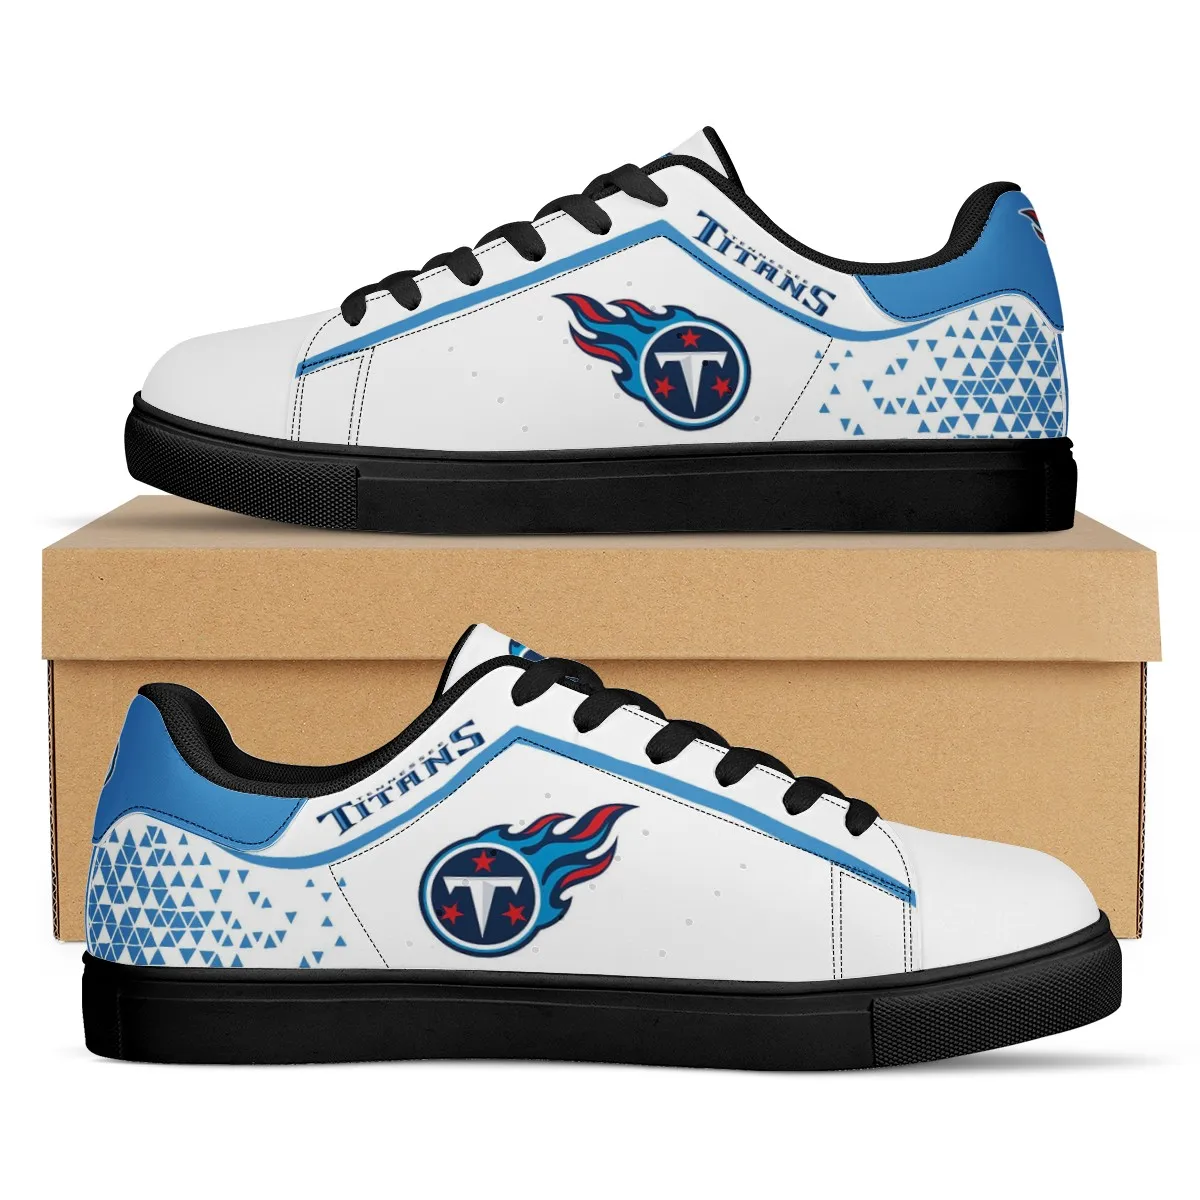 2022 New Team Titans Wholesale Shoes Casual Custom Football Fans Sneakers  Team Logo Soccer Sports Ads Shoes - Buy Nfl Titans,Nfl Team Titans Shoes  Sneakers,Man Shoe Casual Shoe Sport Shoe Product on